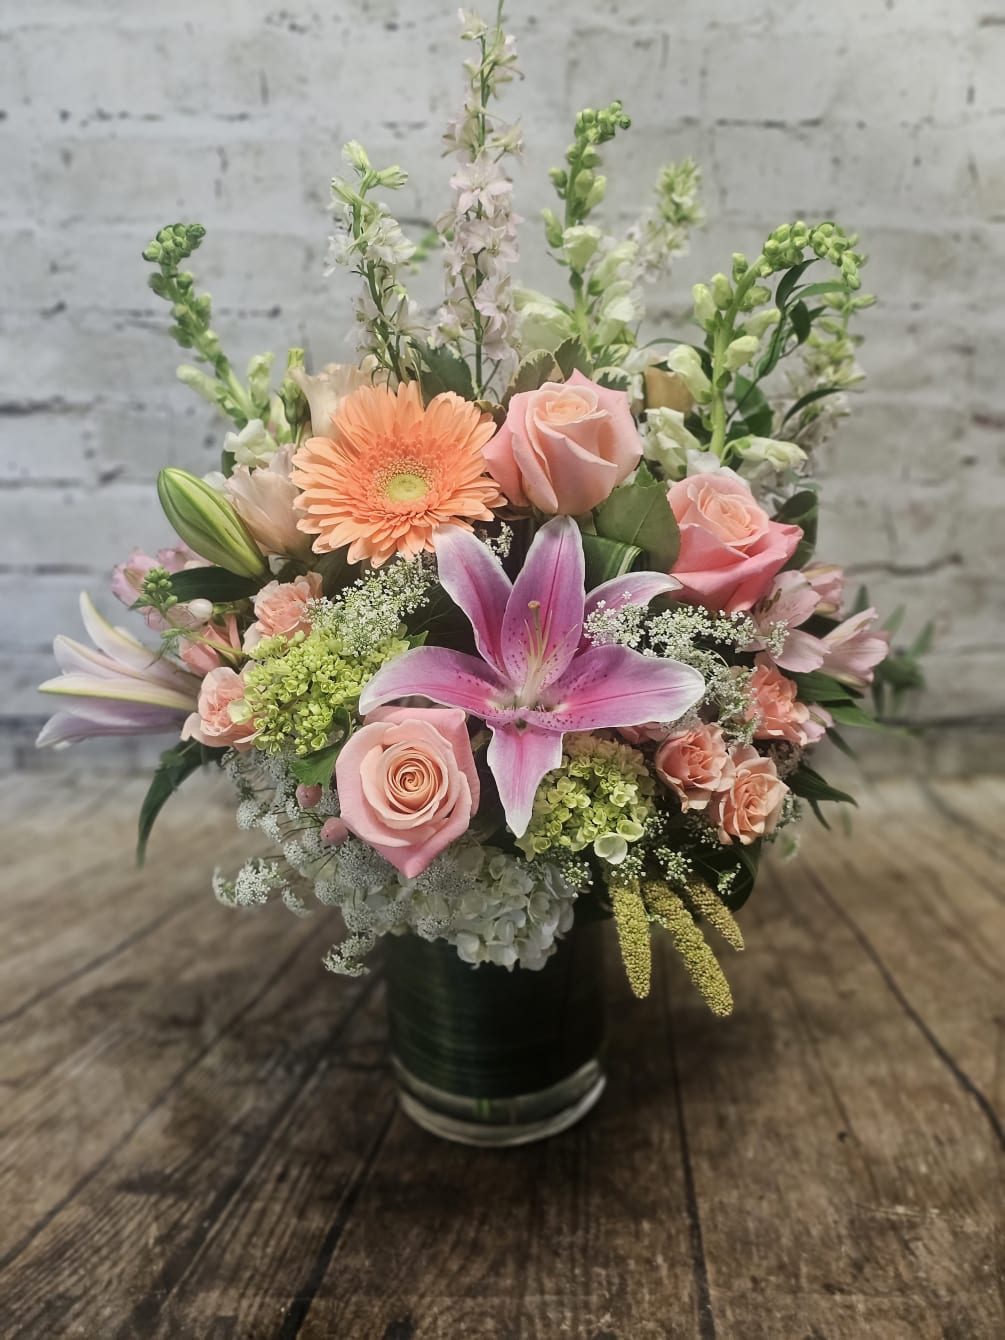 A beautiful garden assortment in soft and sweet pastel colors. 